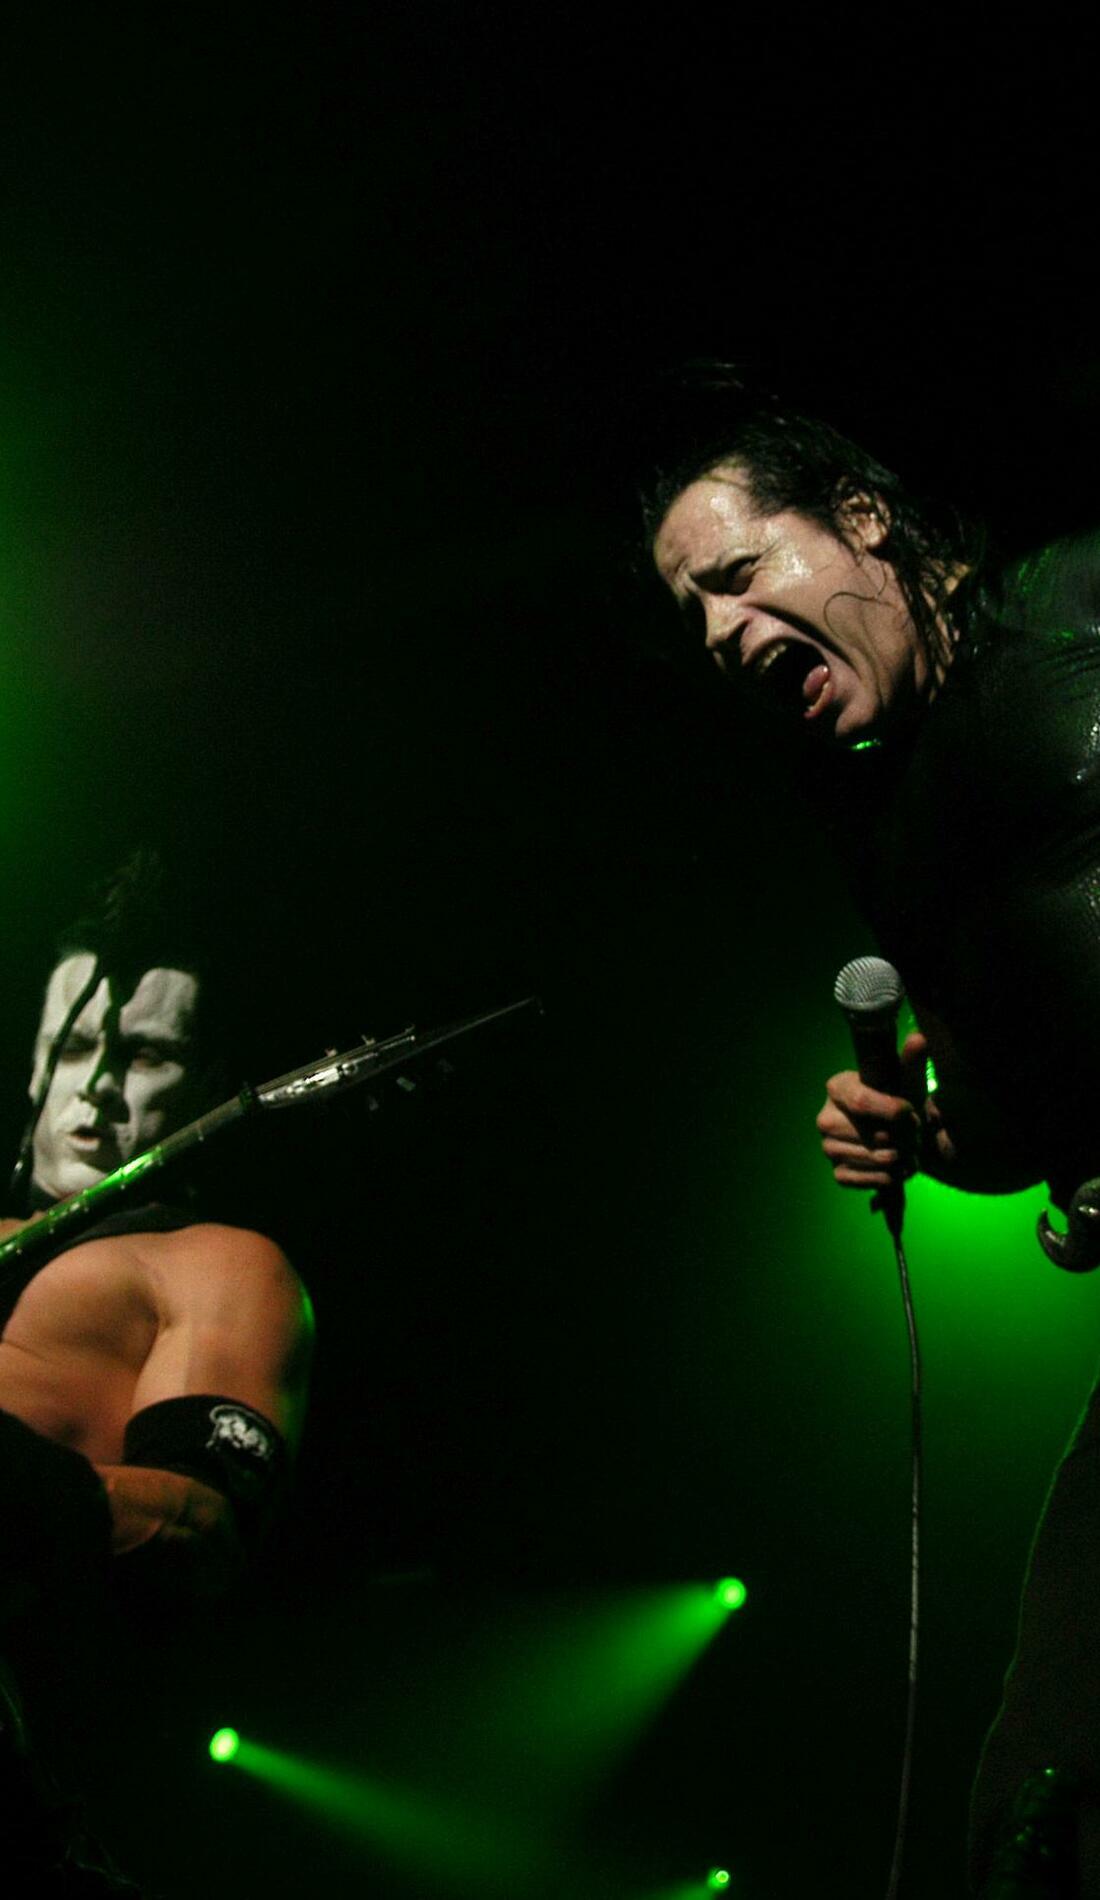 A Danzig live event